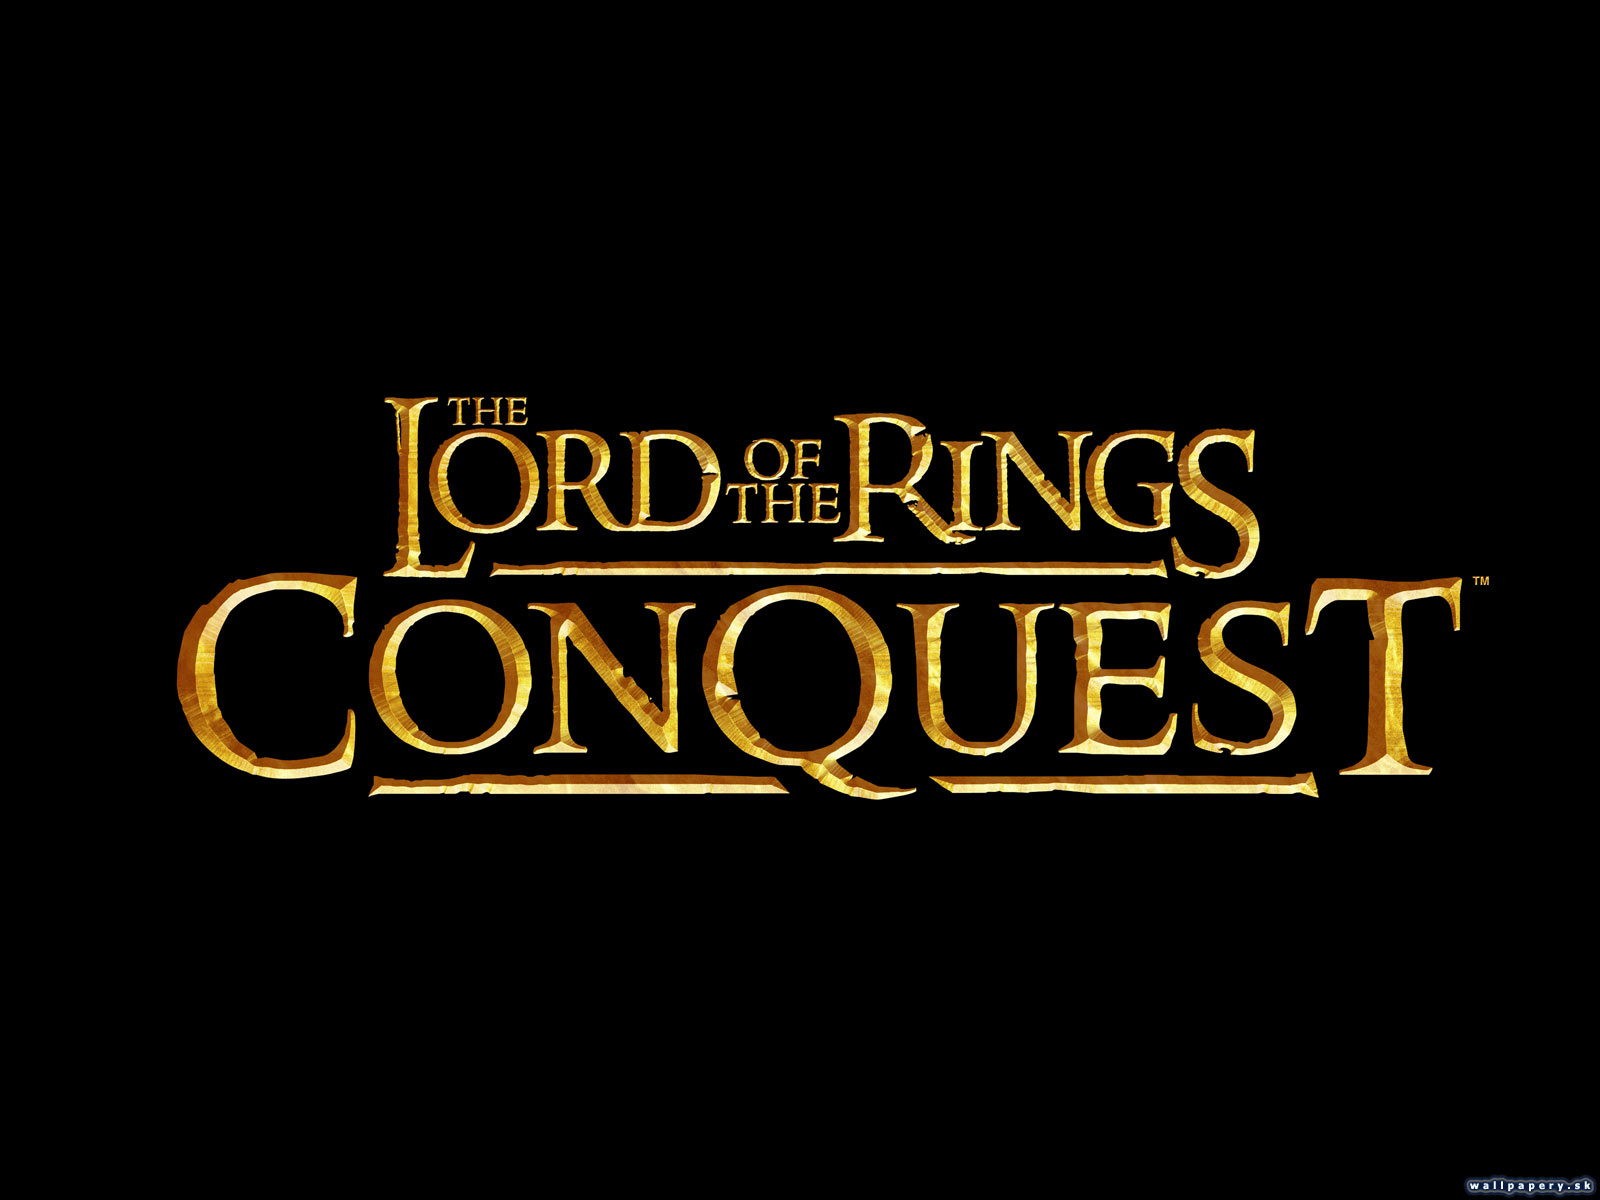 The Lord of the Rings: Conquest - wallpaper 1